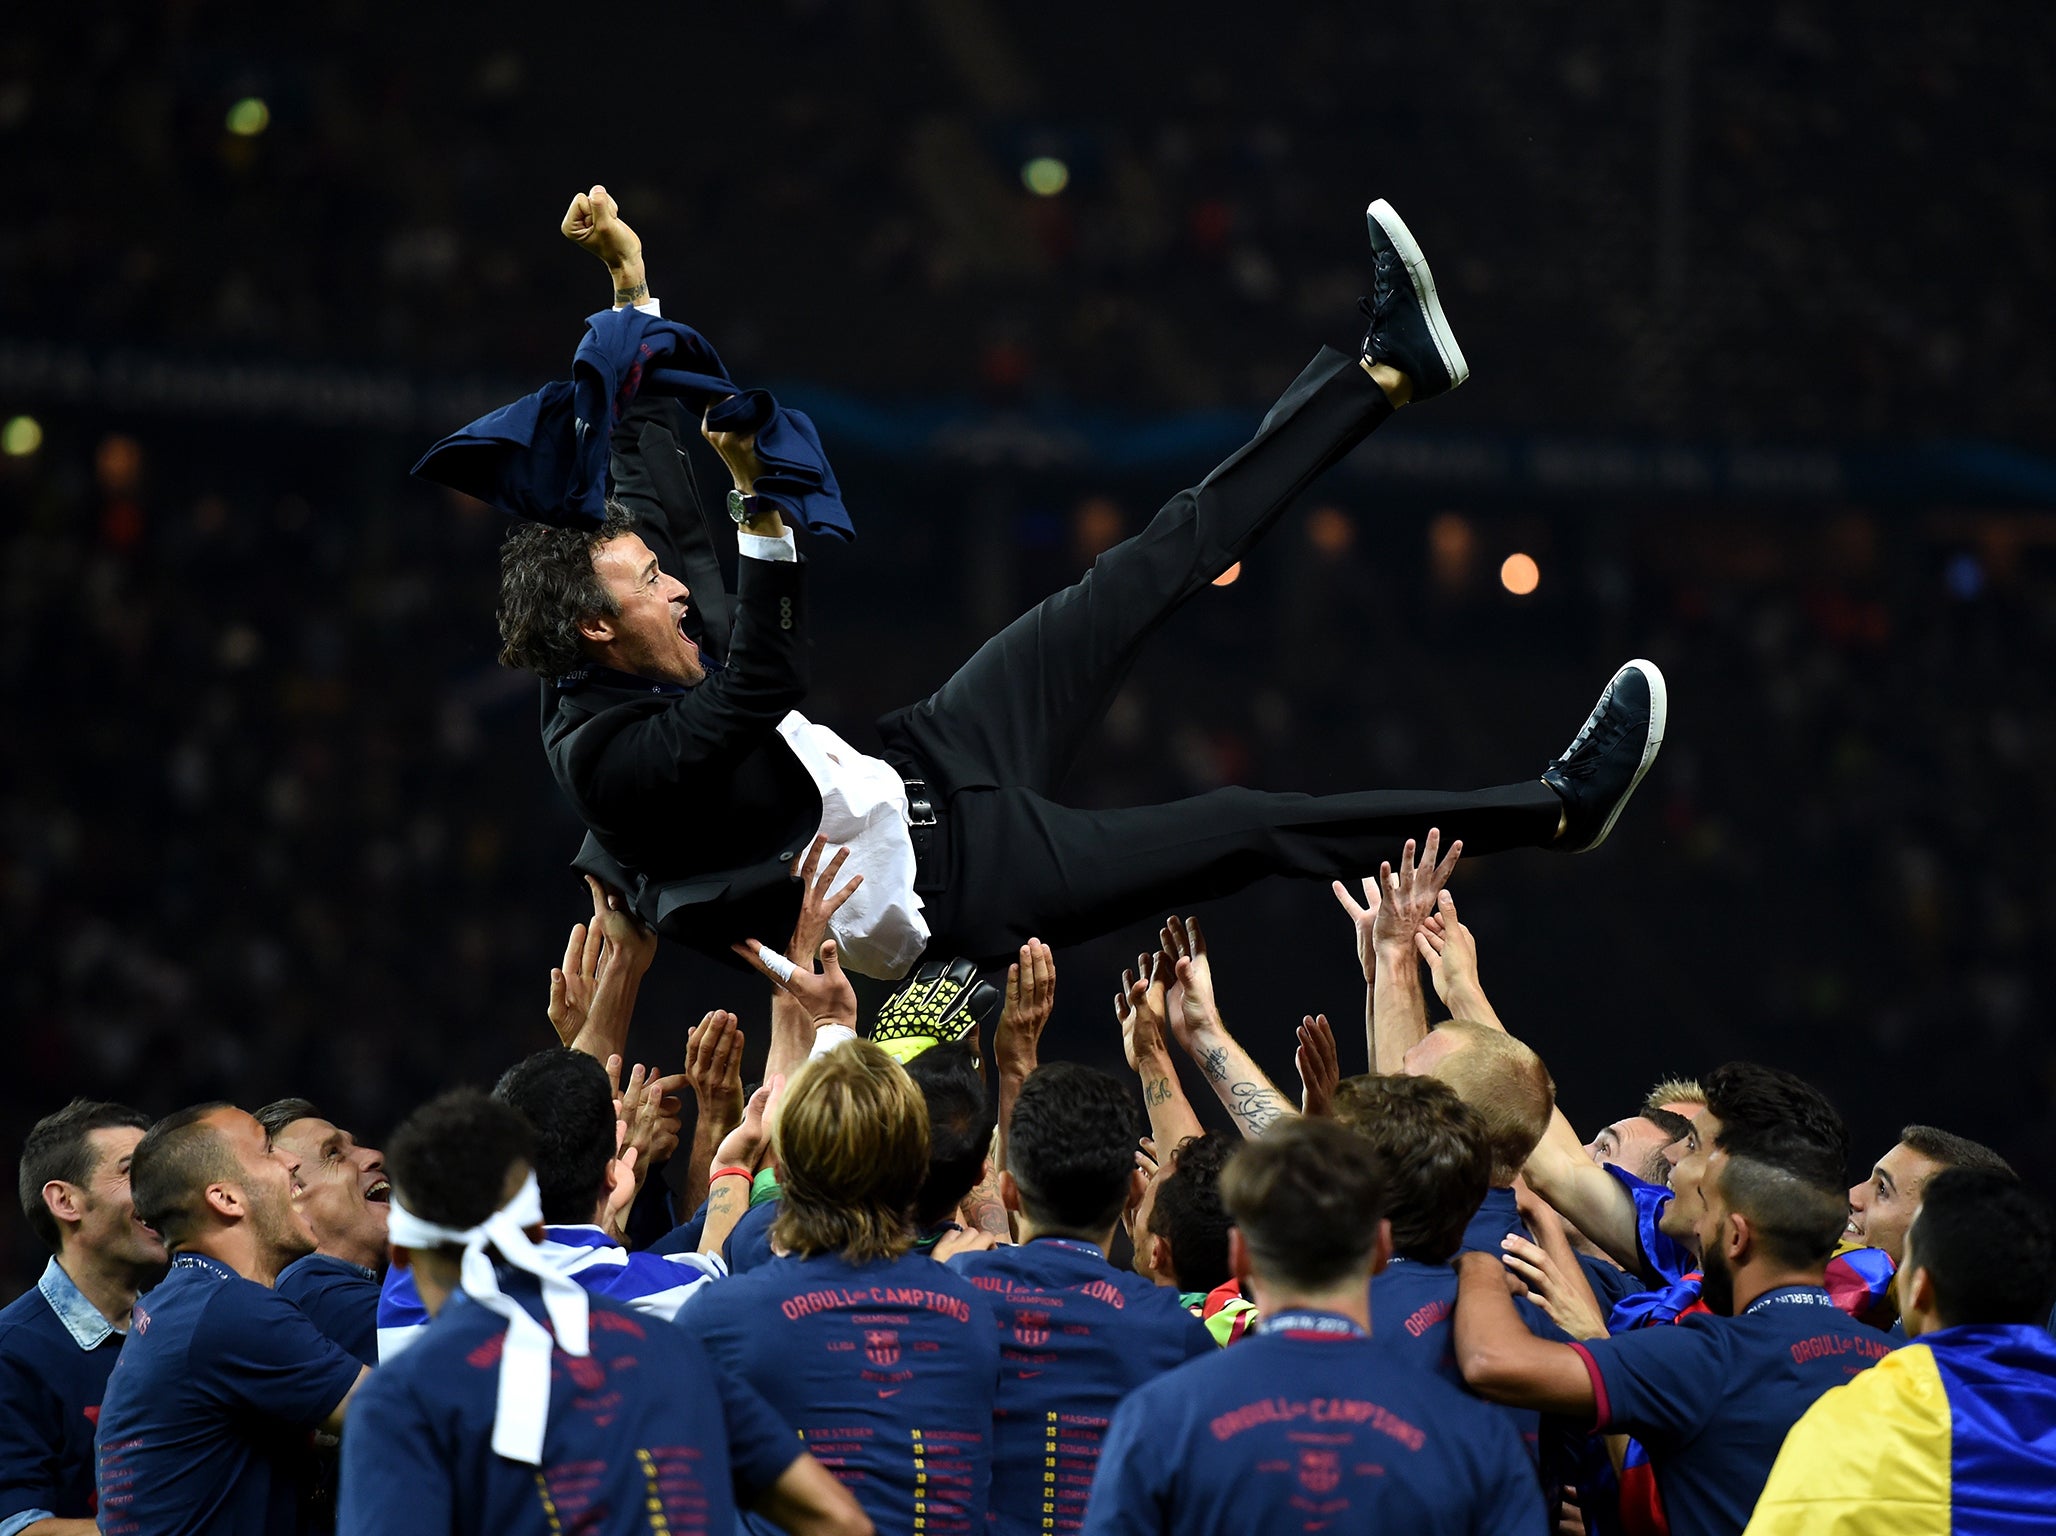 Chelsea&apos;s Marcos Alonso lauds former Barcelona boss Luis Enrique as &apos;a great coach with many qualities&apos;